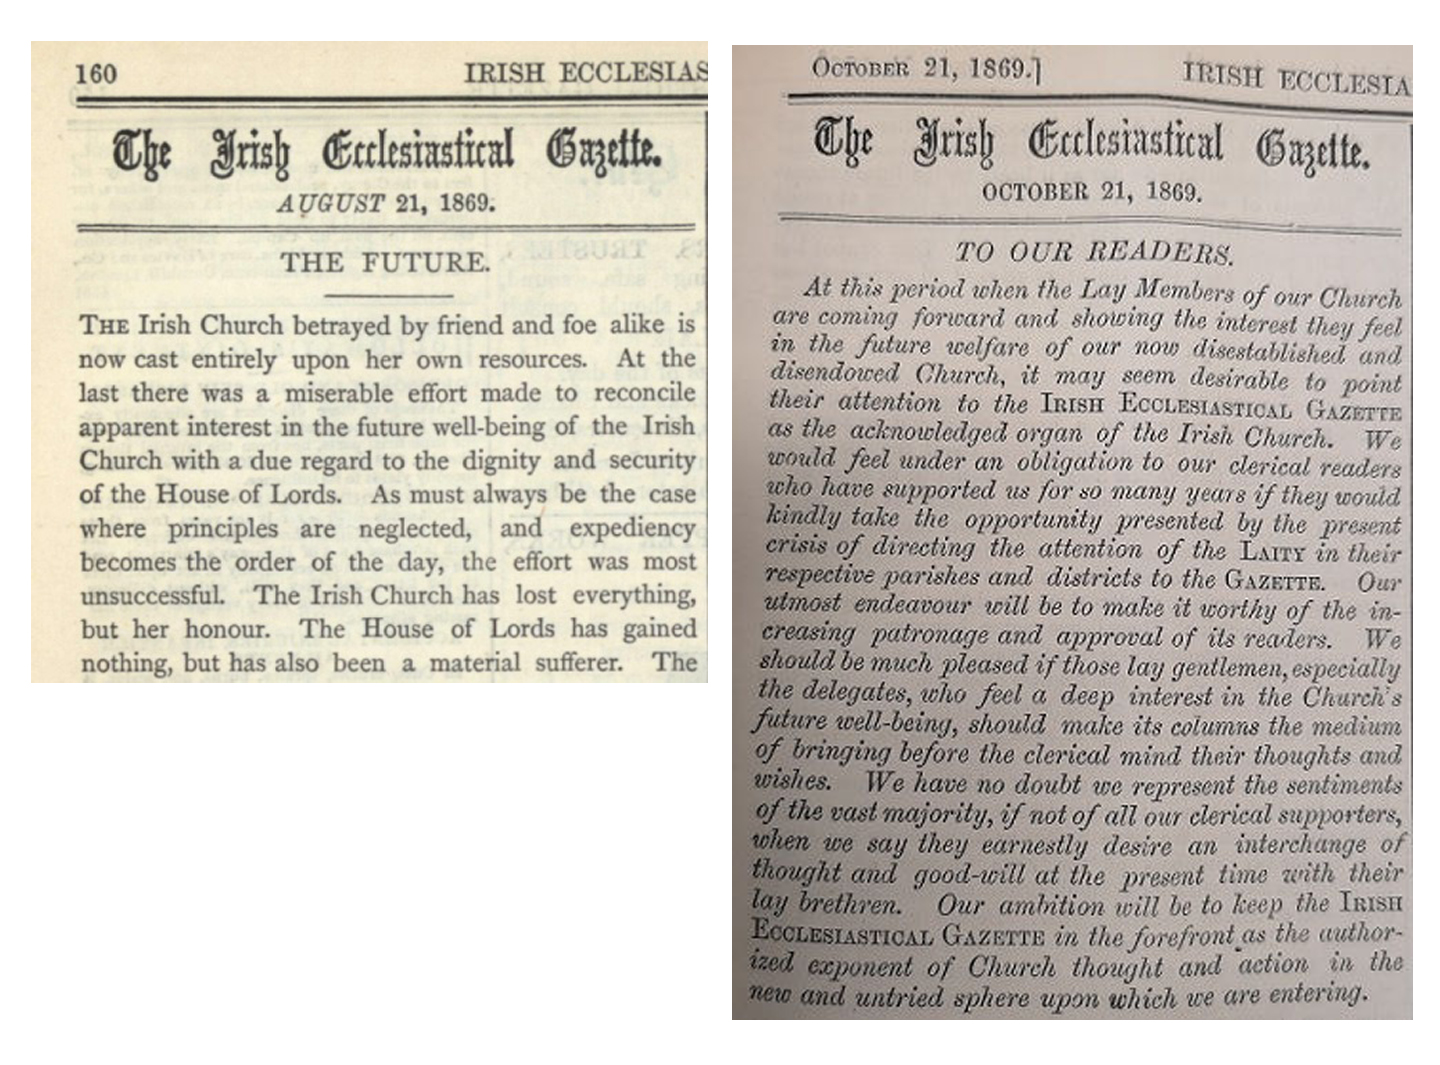 Contrasting editorials in the August and October editions of the Gazette portray the Church's initial disappointment and a sense of betrayal following the passage of the Irish Church Act for August, with a later more optimistic tone about the future destiny of the Church, by October 1869. To view these and the full content of the Church of Ireland Gazette (Irish Ecclesiastical Gazette to 1900) from 1856 to 1949, see https://esearch.informa.ie/rcb